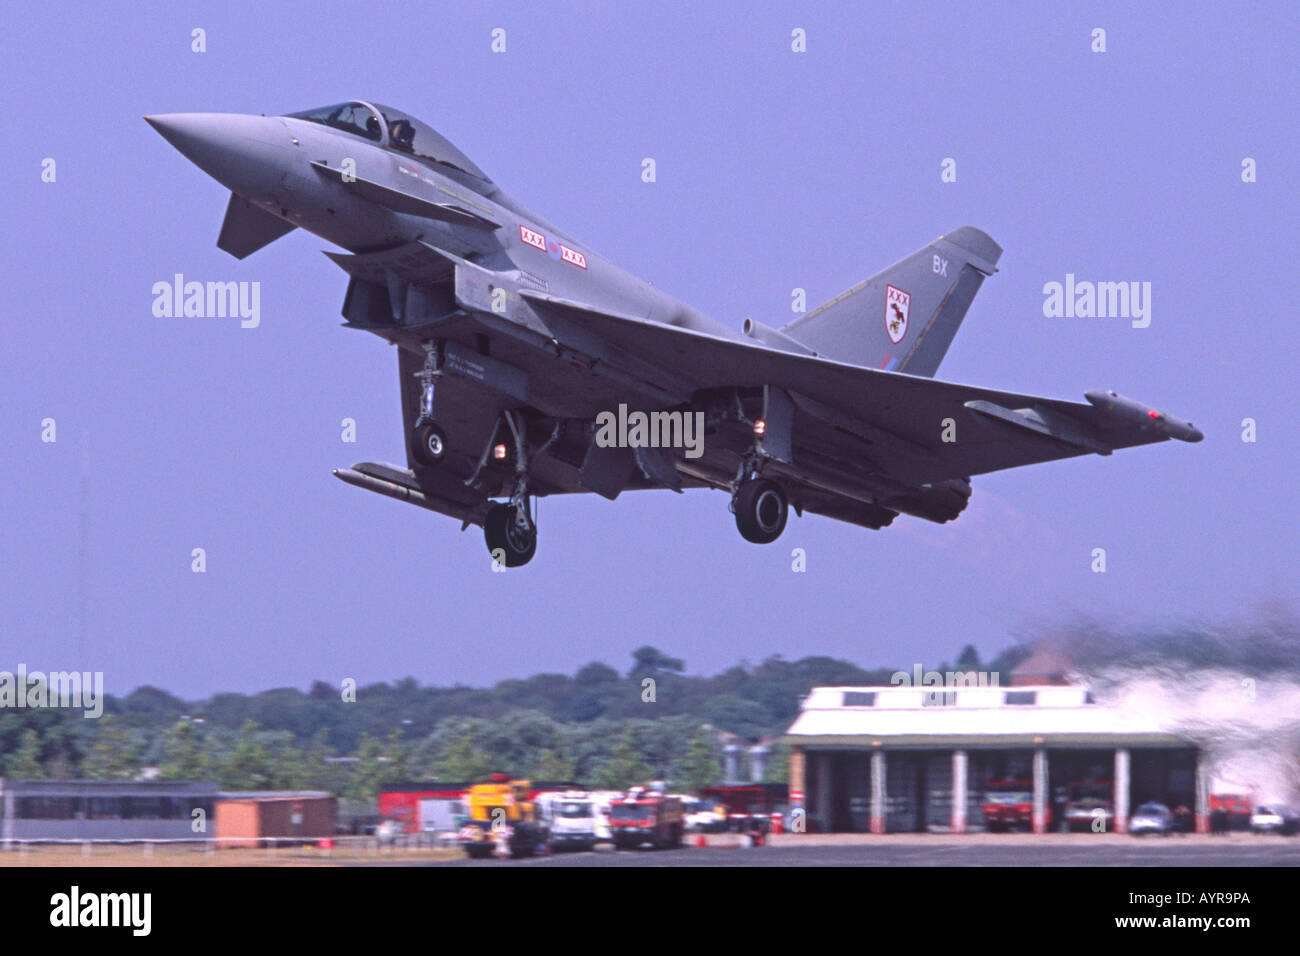 Typhoon F2 jet fighter aircraft operated by the RAF taking off at the Farnborough International Airshow. Stock Photo